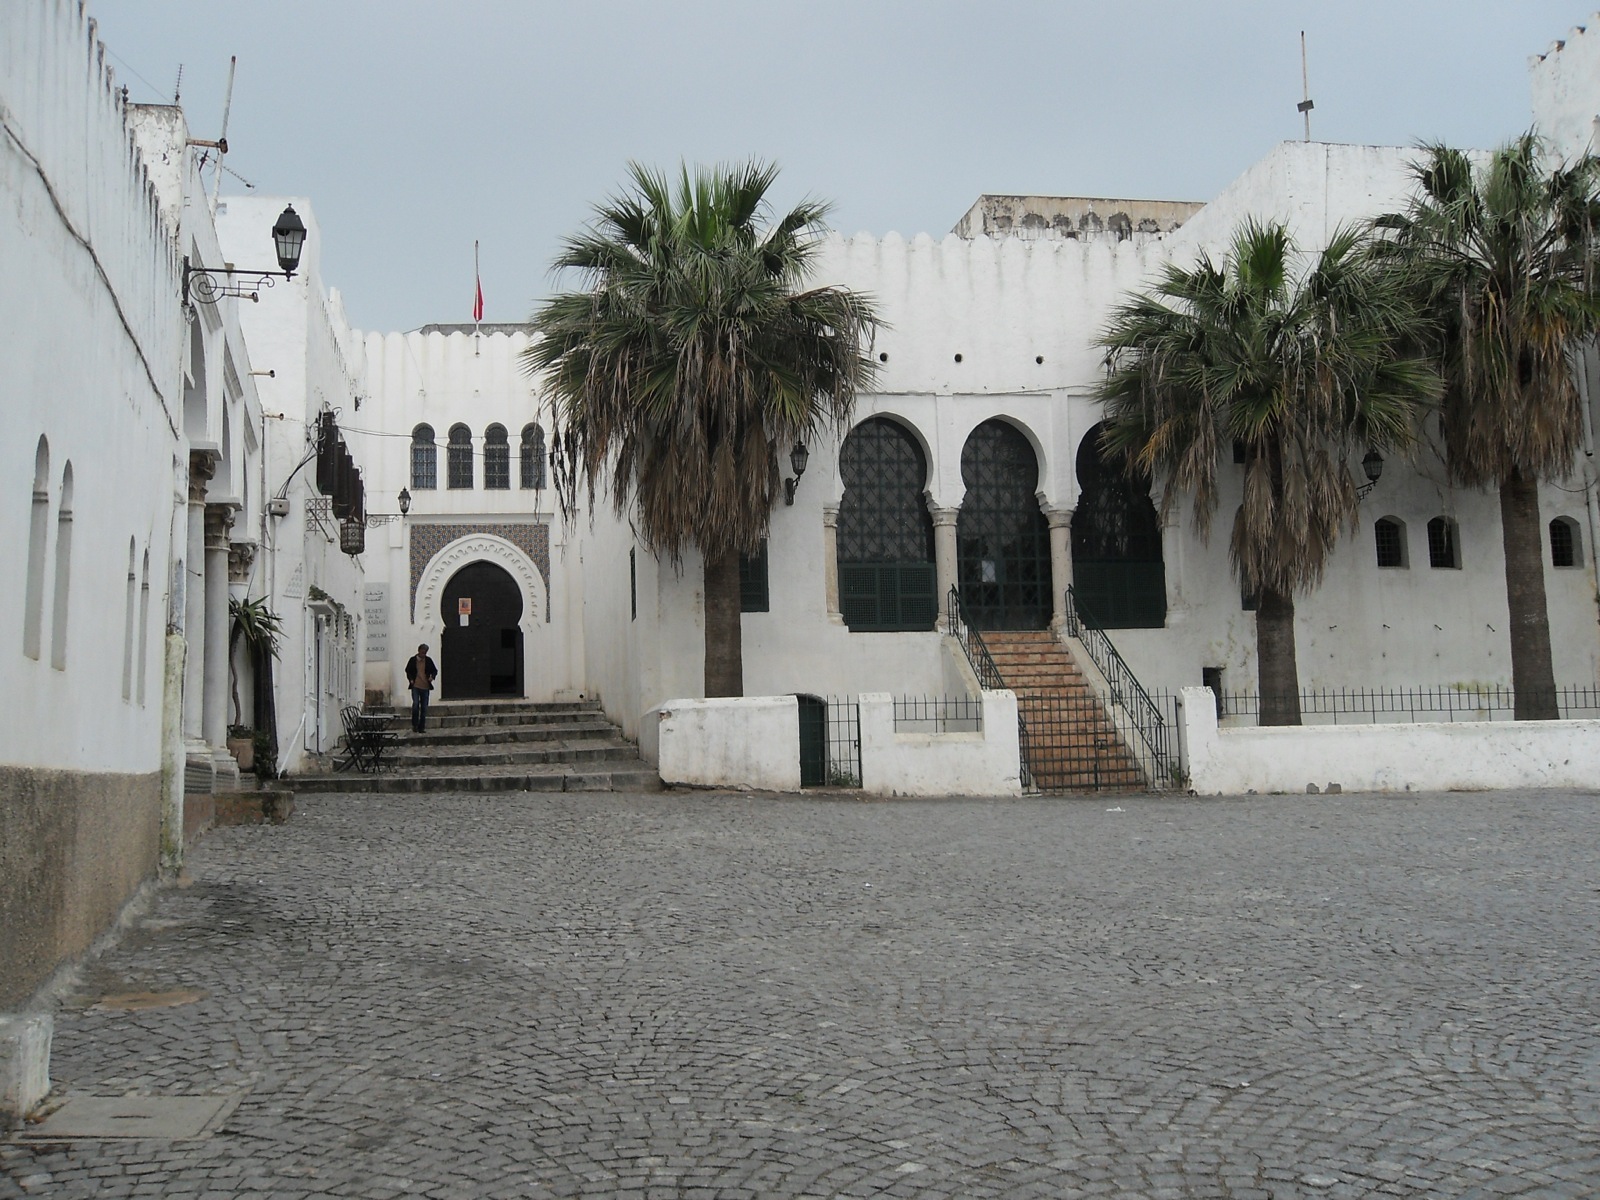 View of the entrance to the Casbah Museum (left) and Prison